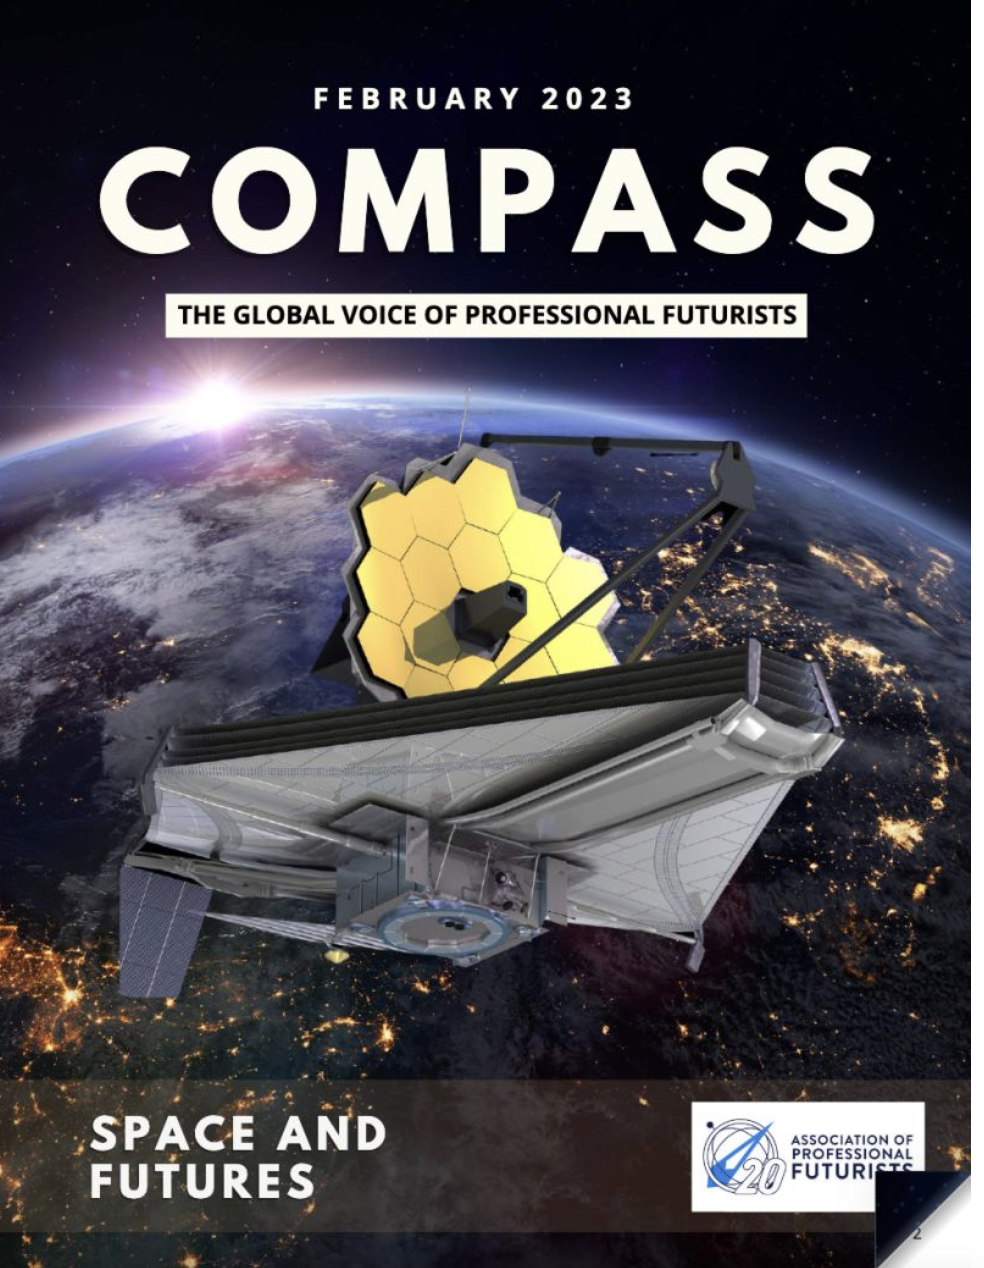 Flipbook of COMPASS, the global voice of professional futurists